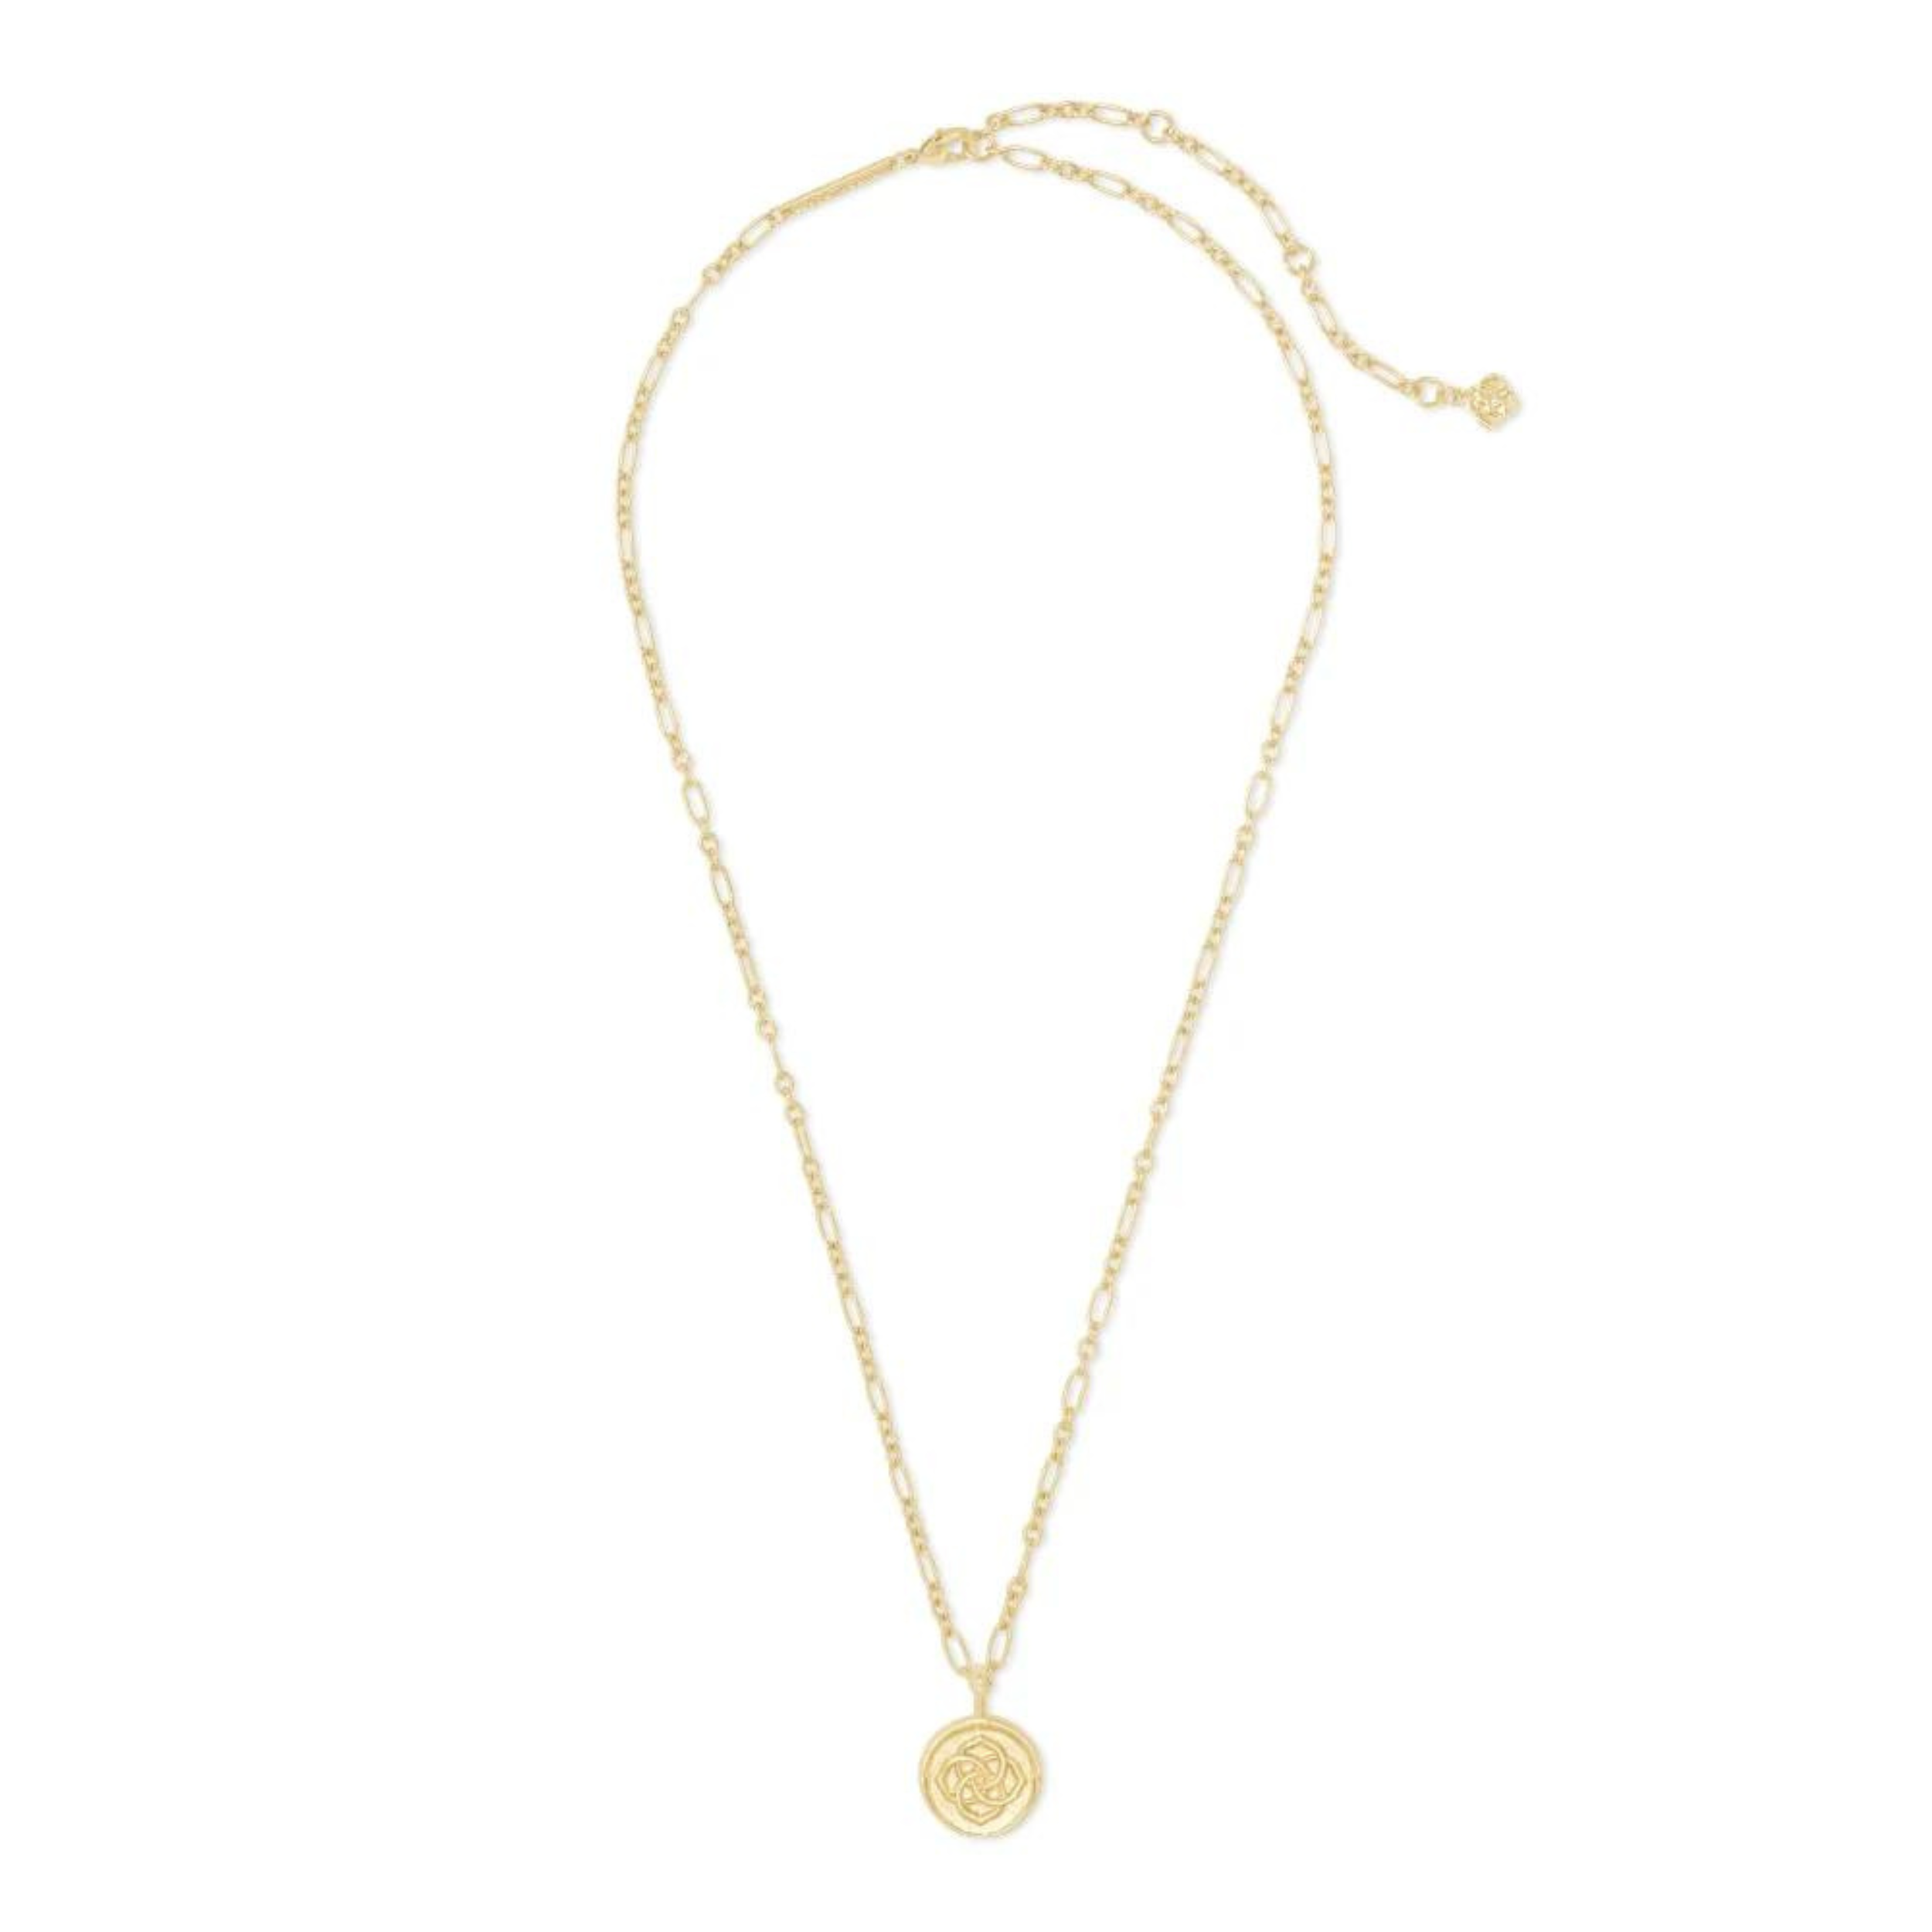 Kendra Scott | Dira Coin Pendant in Gold - Giddy Up Glamour Boutique